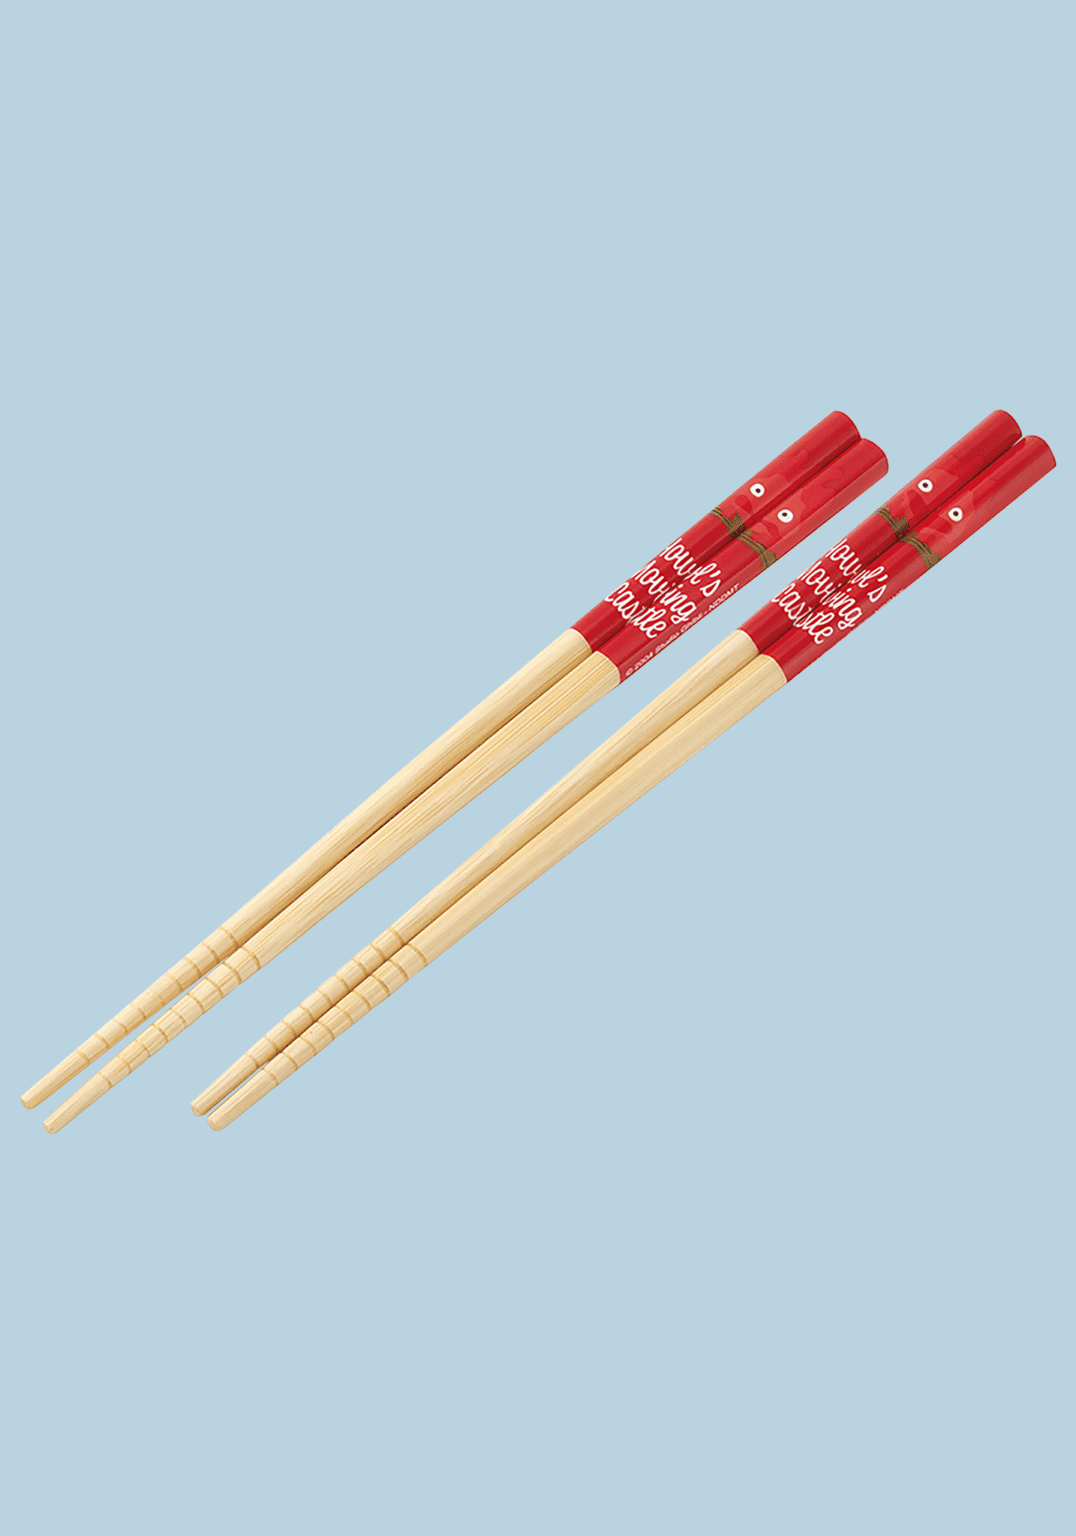 Clever Idiots Calcifer Howl's Moving Castle 2-Piece Bamboo Chopstick Set Kawaii Gifts 4973307631429